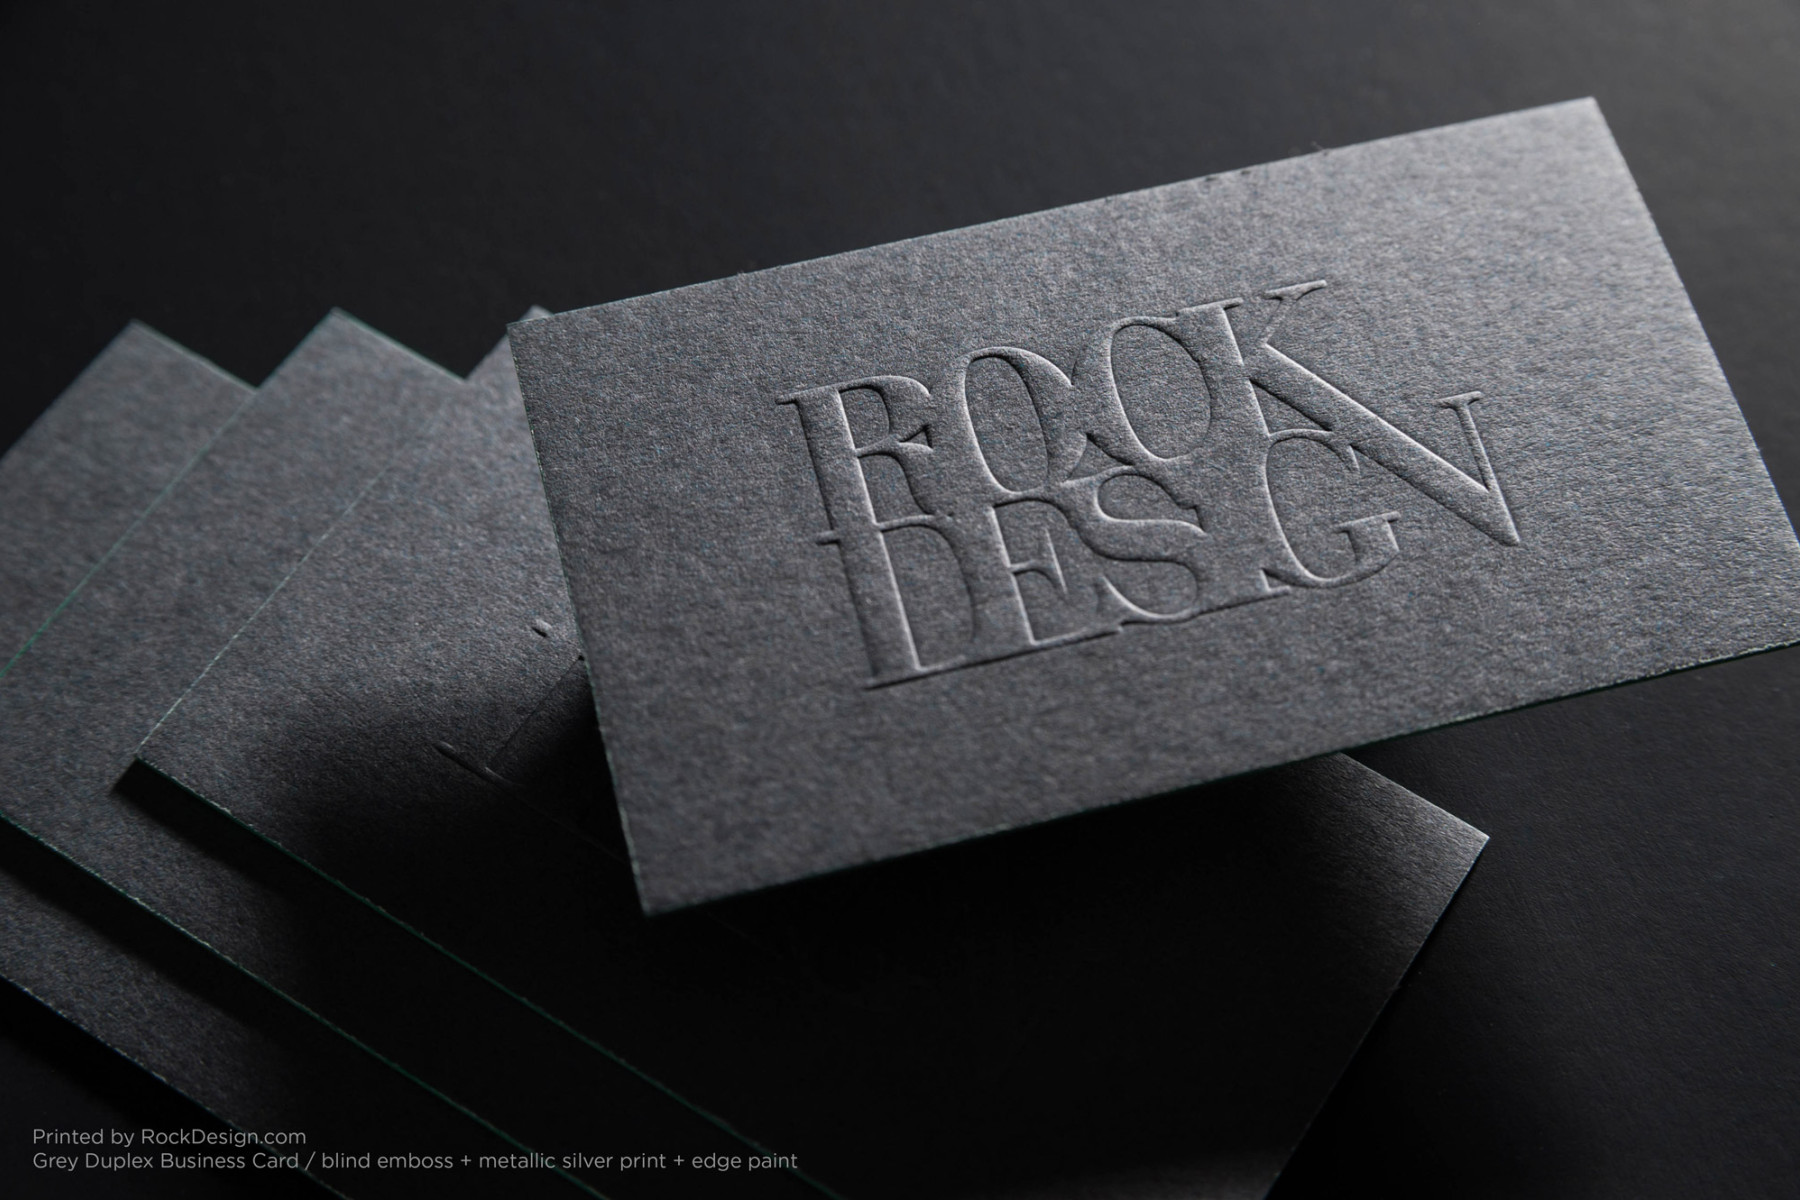 Print embossed business cards ONLINE TODAY